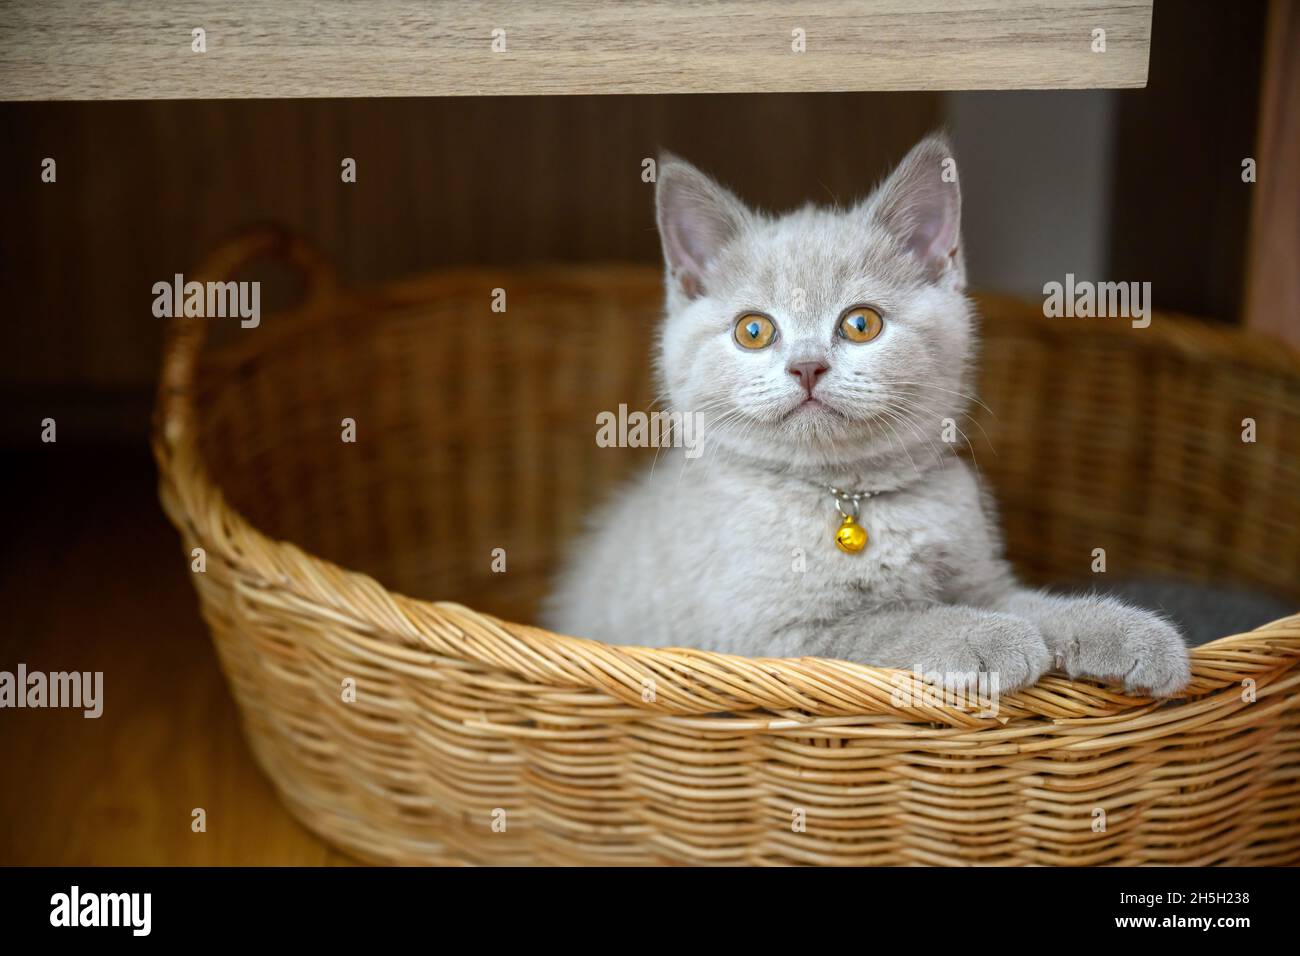 Kitten sits in a woven basket, clings to the edge and looks back, lilac British Shorthair cat. On the neck there is a golden bell. Playing naughty fun Stock Photo